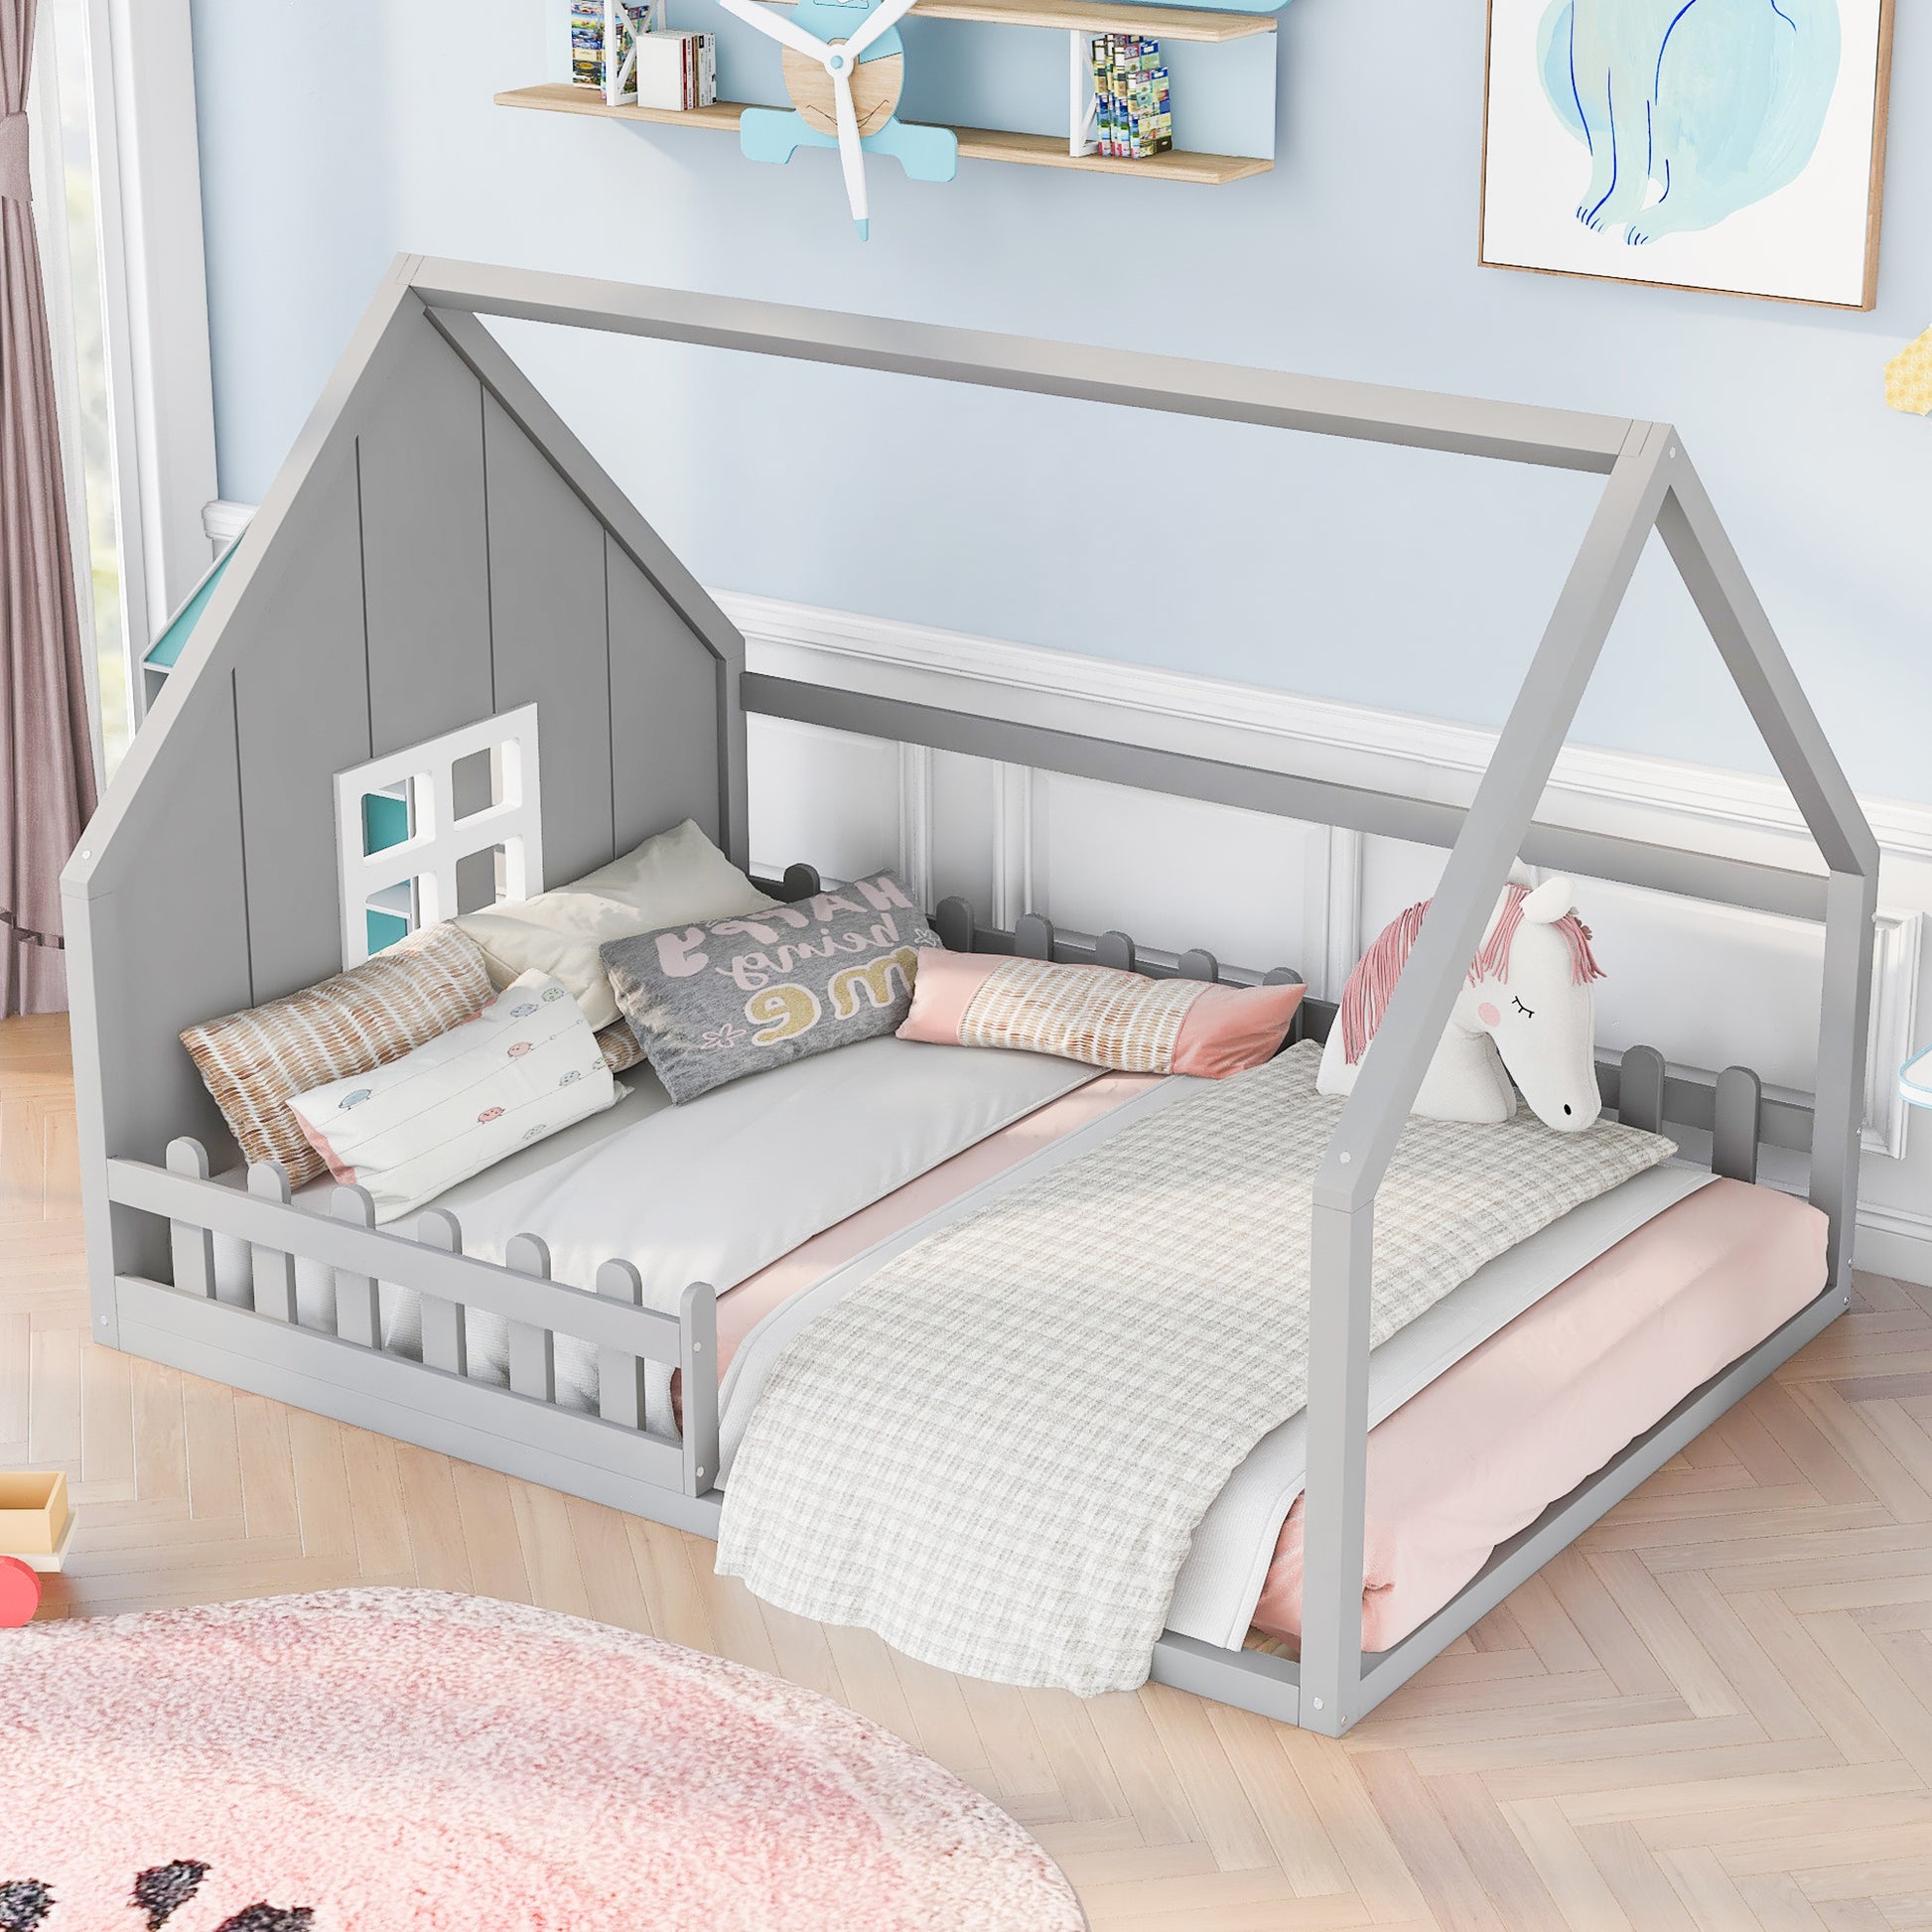 Full Size Wood House Bed with Window and Fence - Play. Learn. Thrive. ™